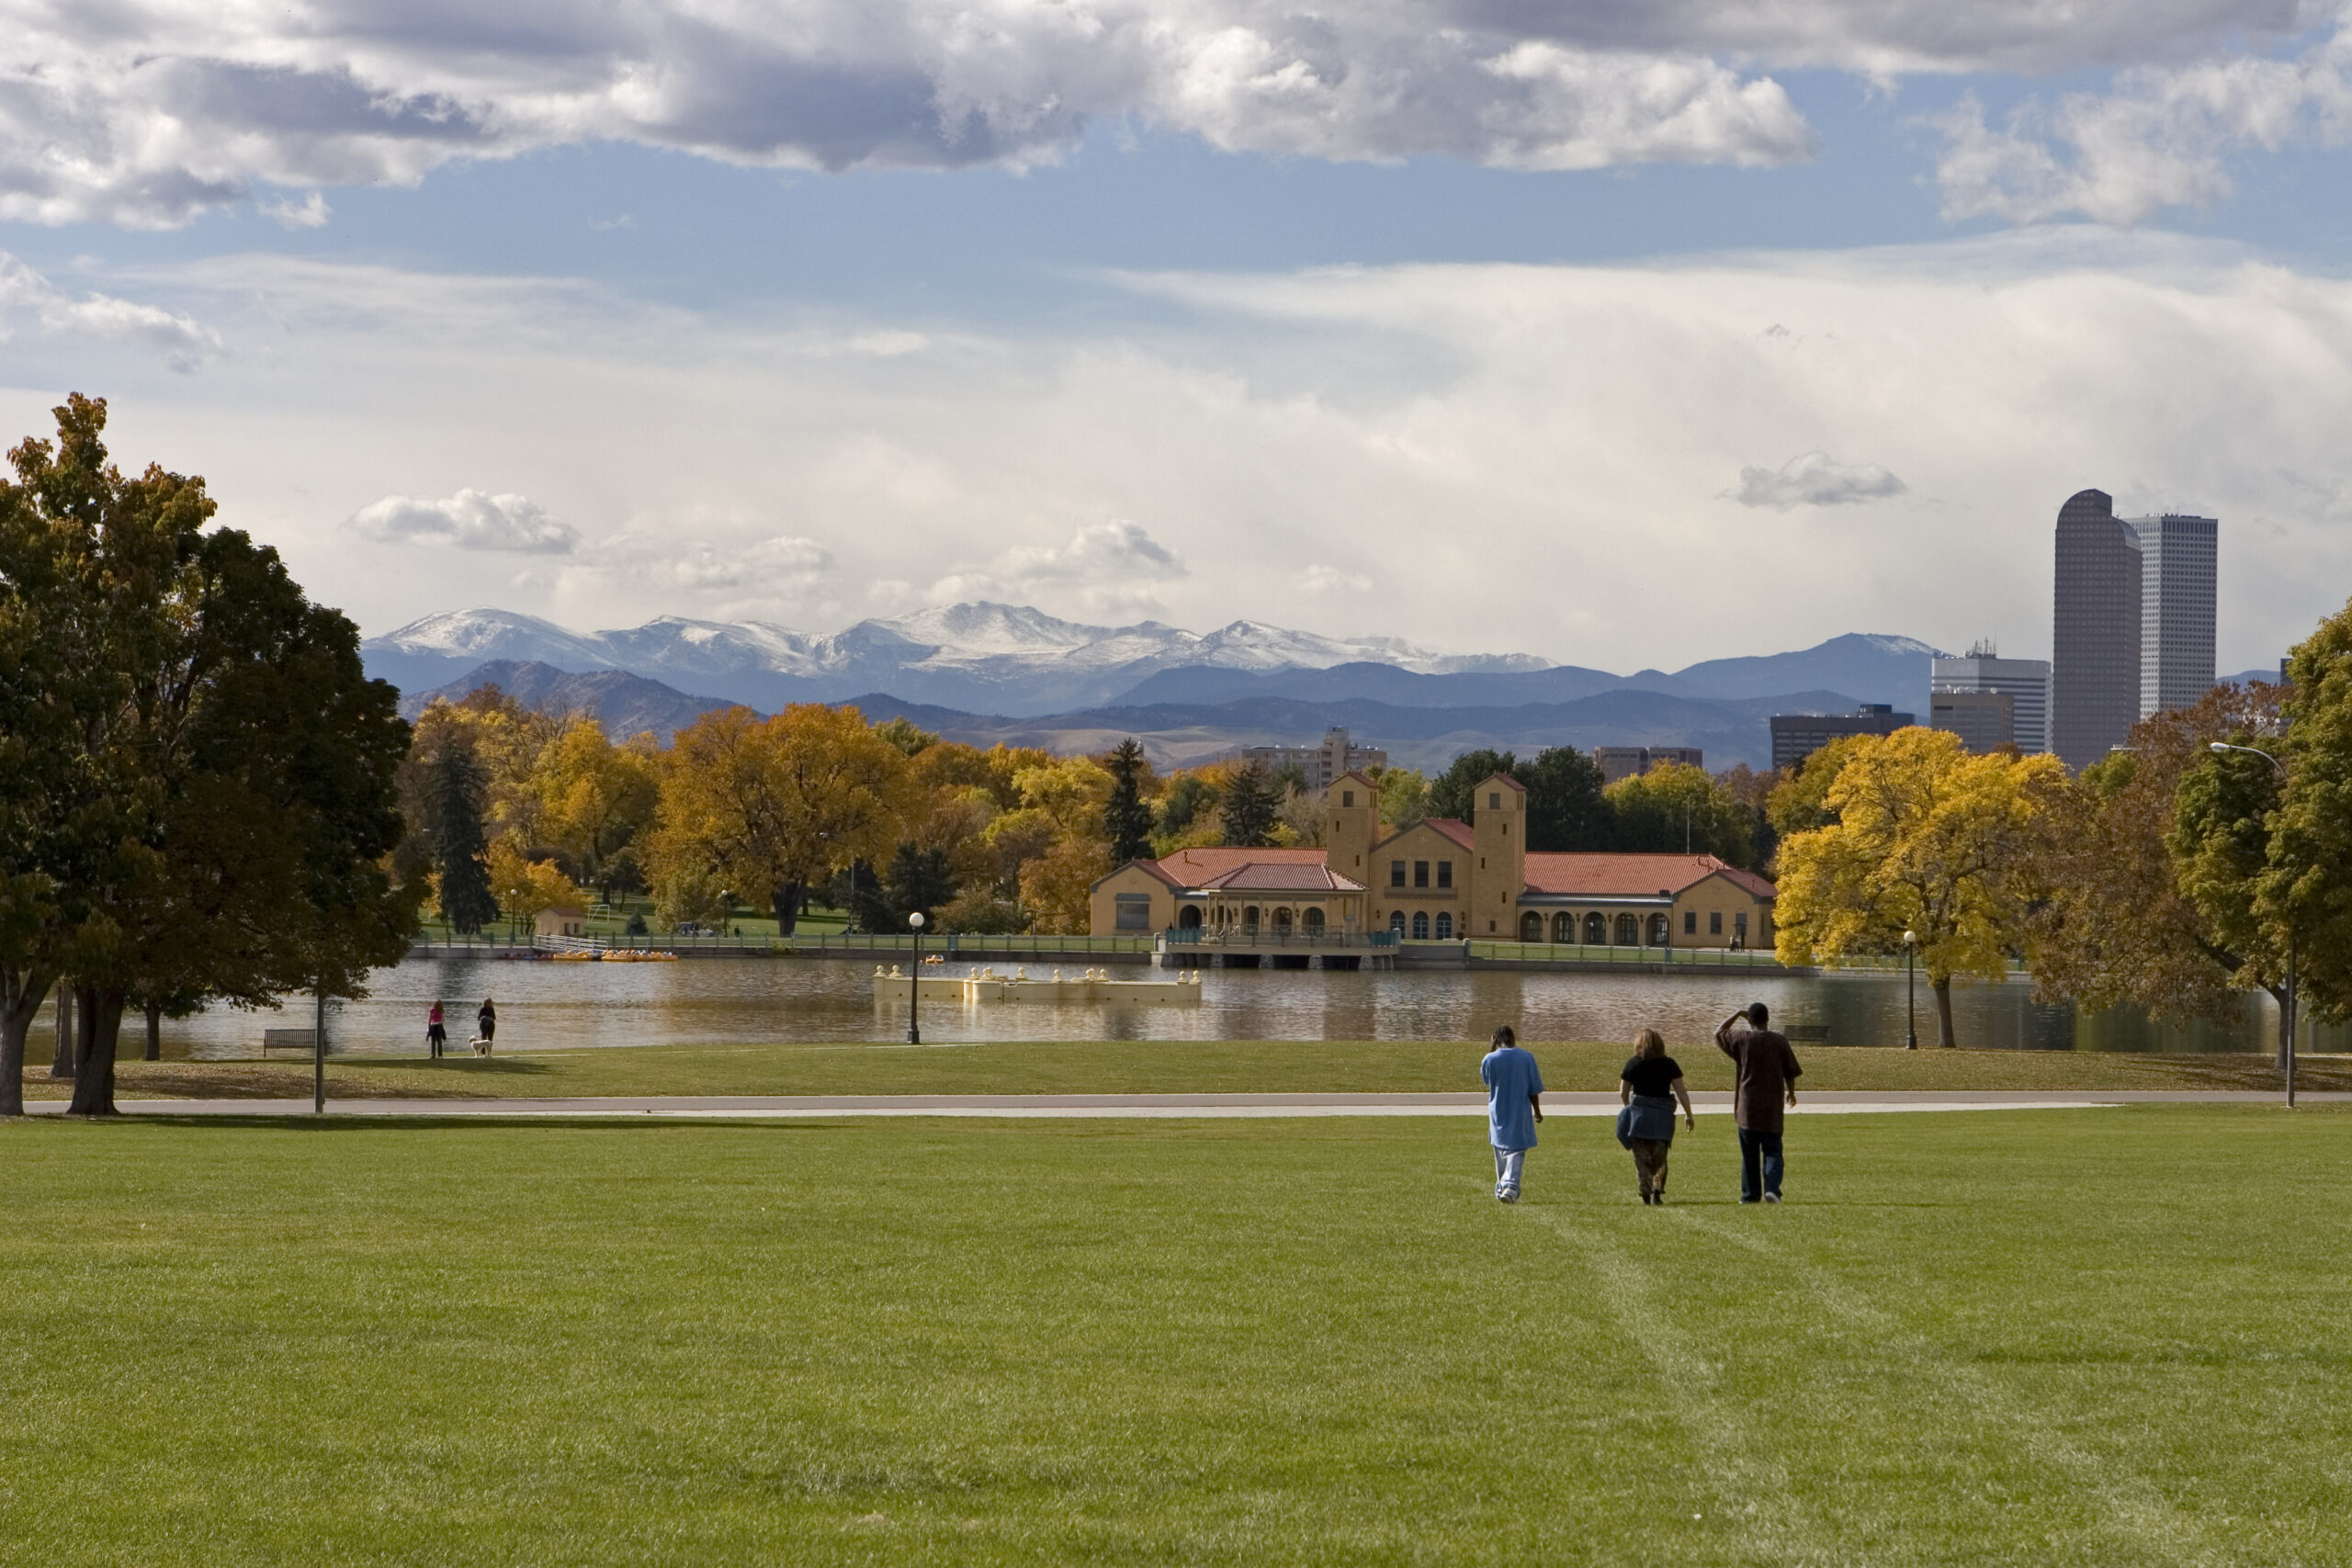 People walking in a park with mountains in the background